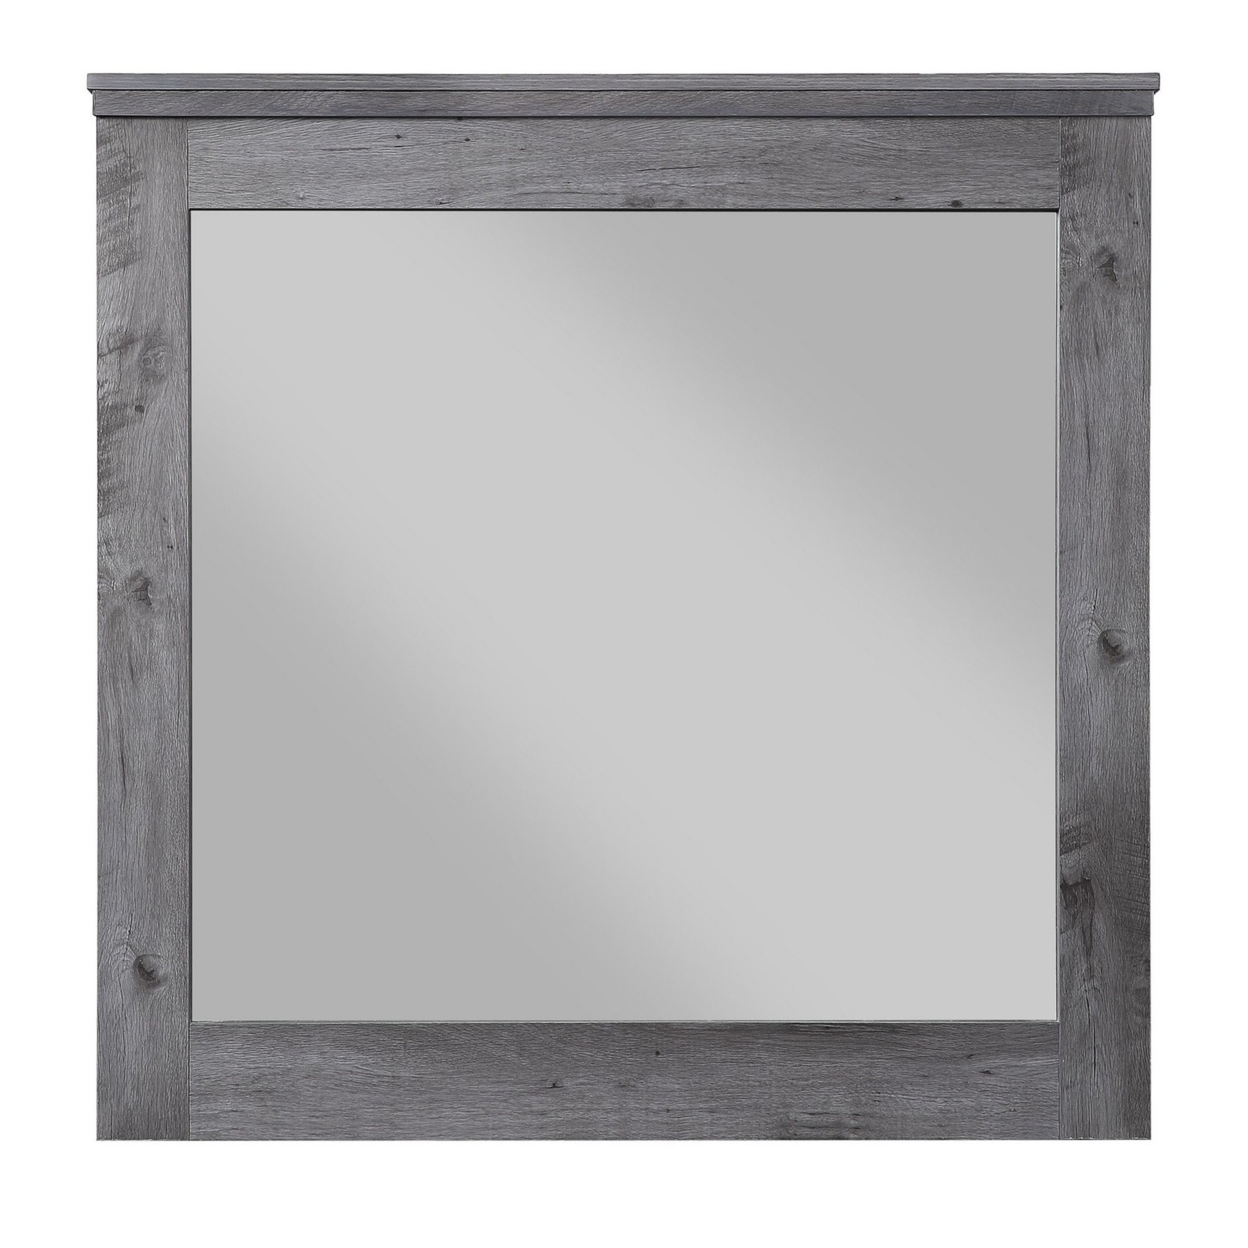 Traditional Wooden Wall Mirror With Rustic Style, Gray- Saltoro Sherpi